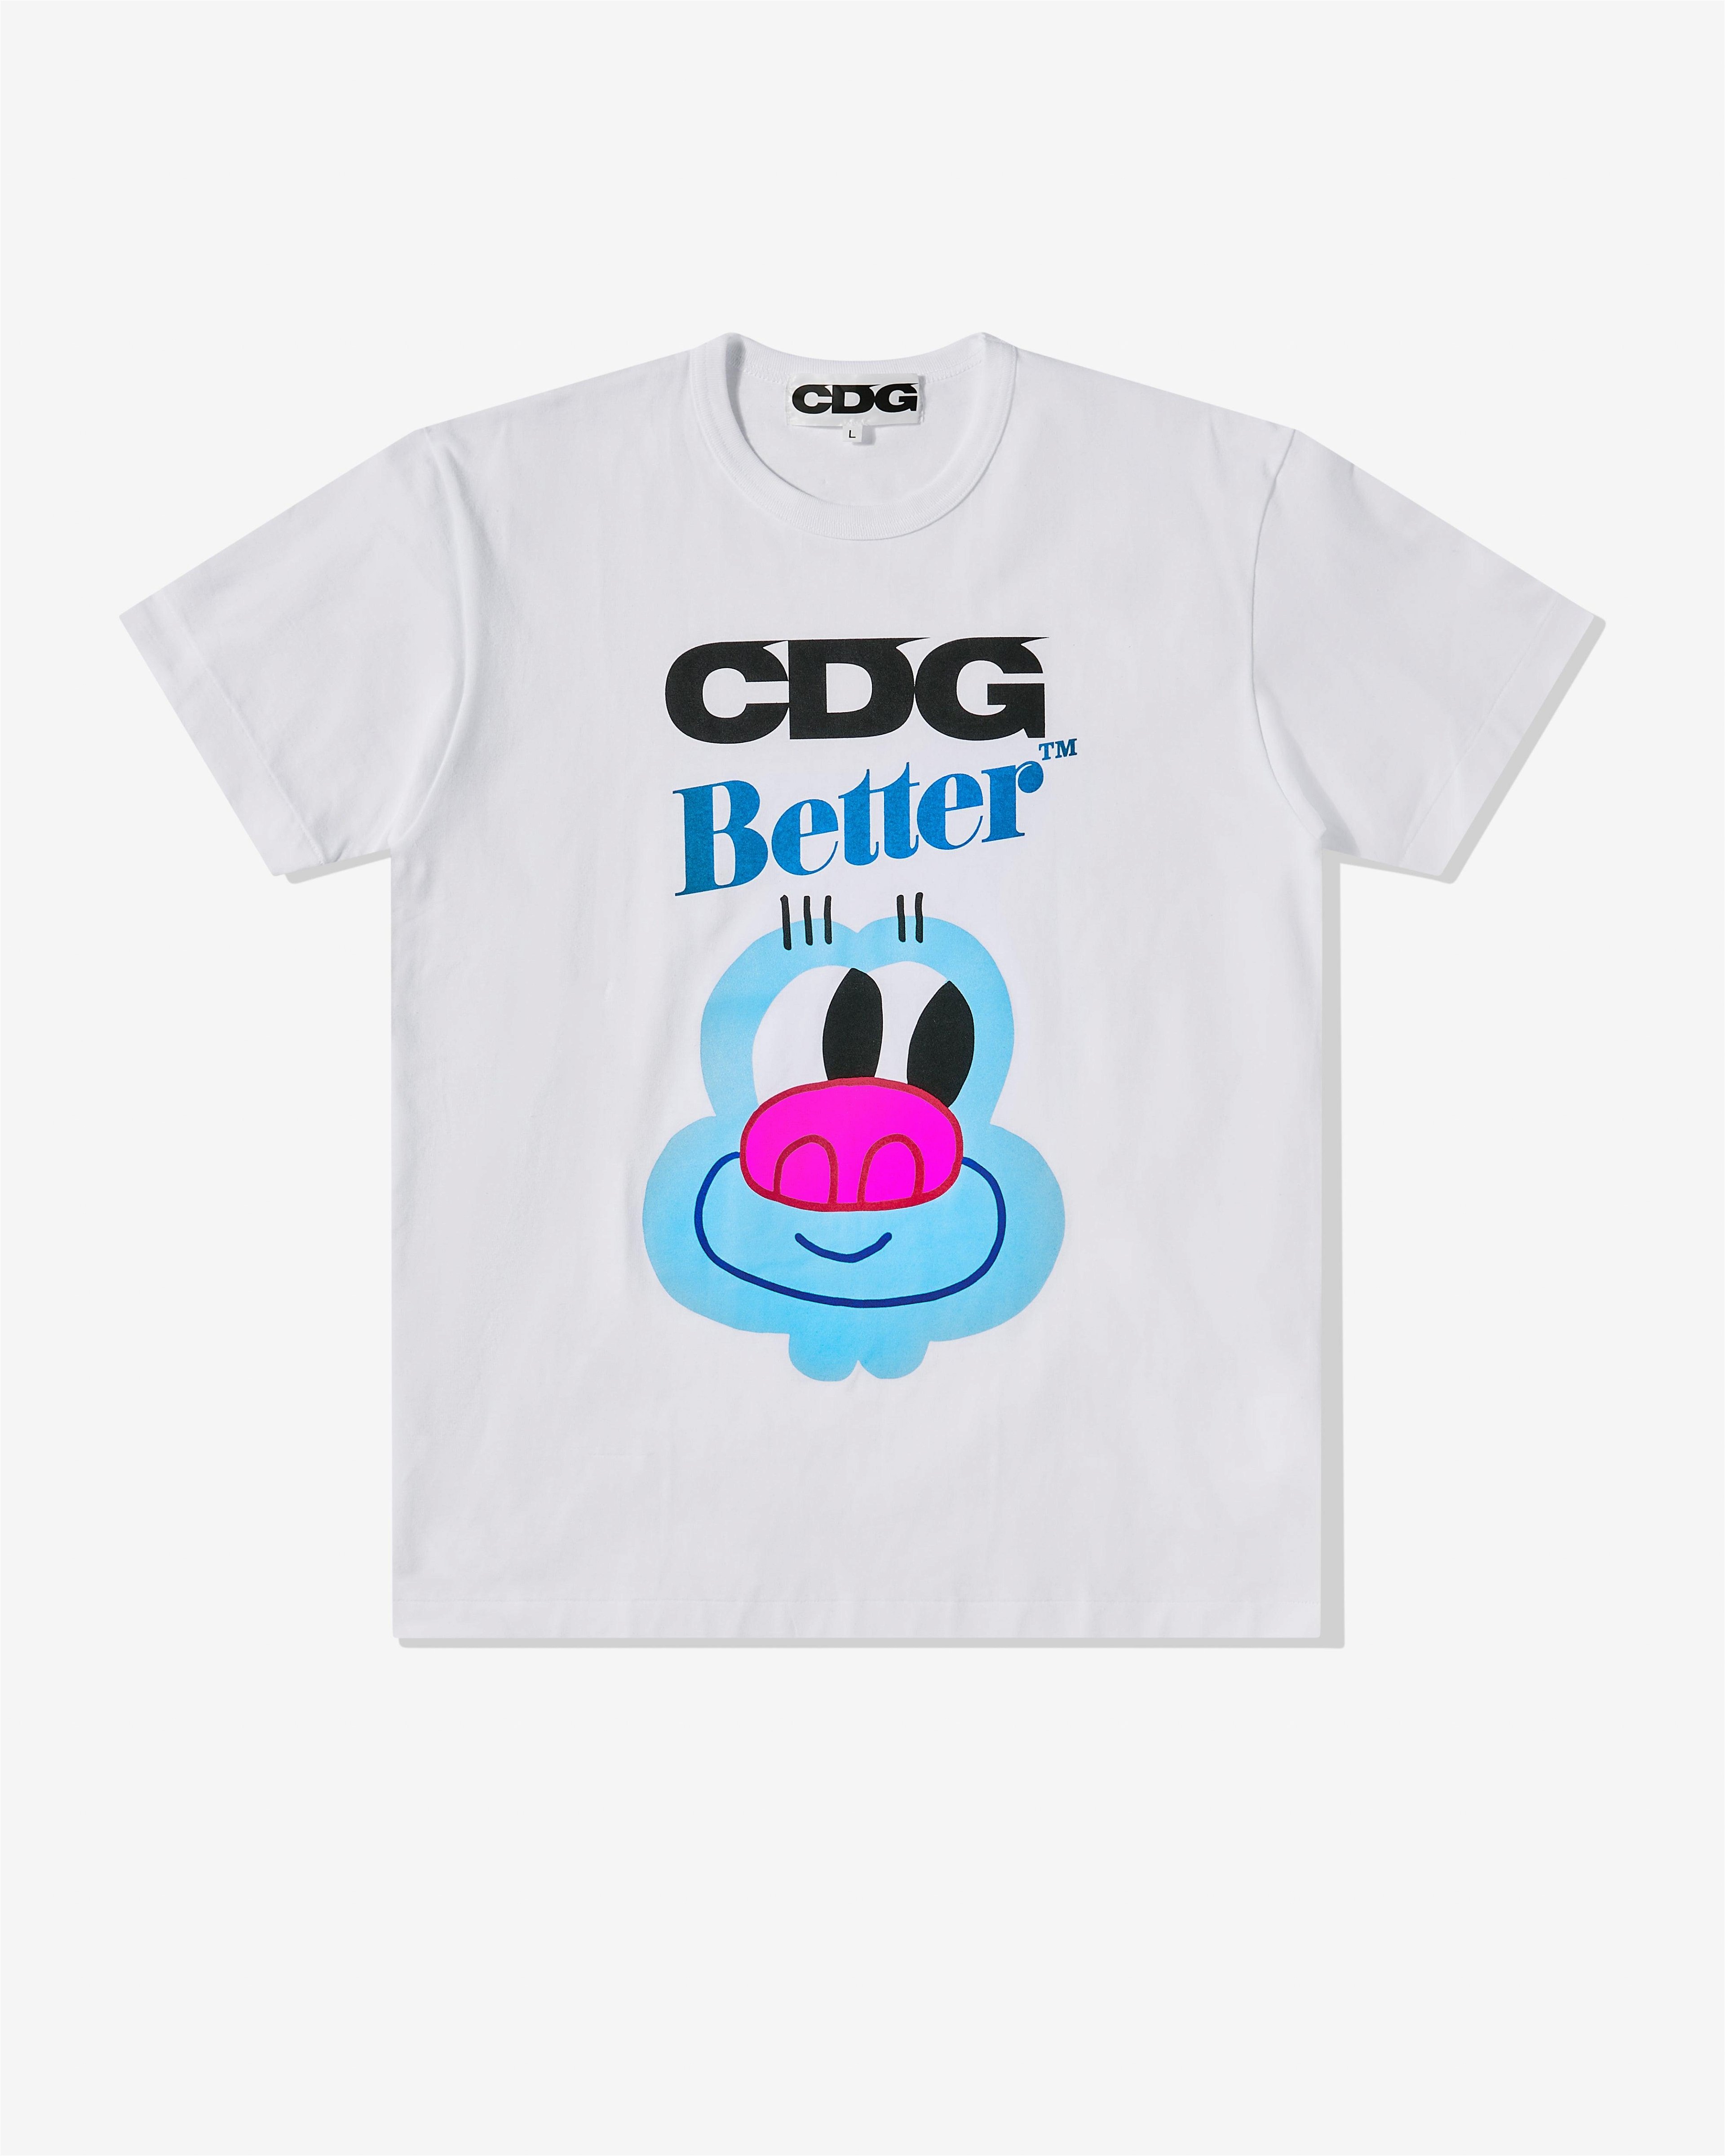 CDG - Better™ Gift Shop Cartoon T-Shirt - (White) by COMME DES GARCONS